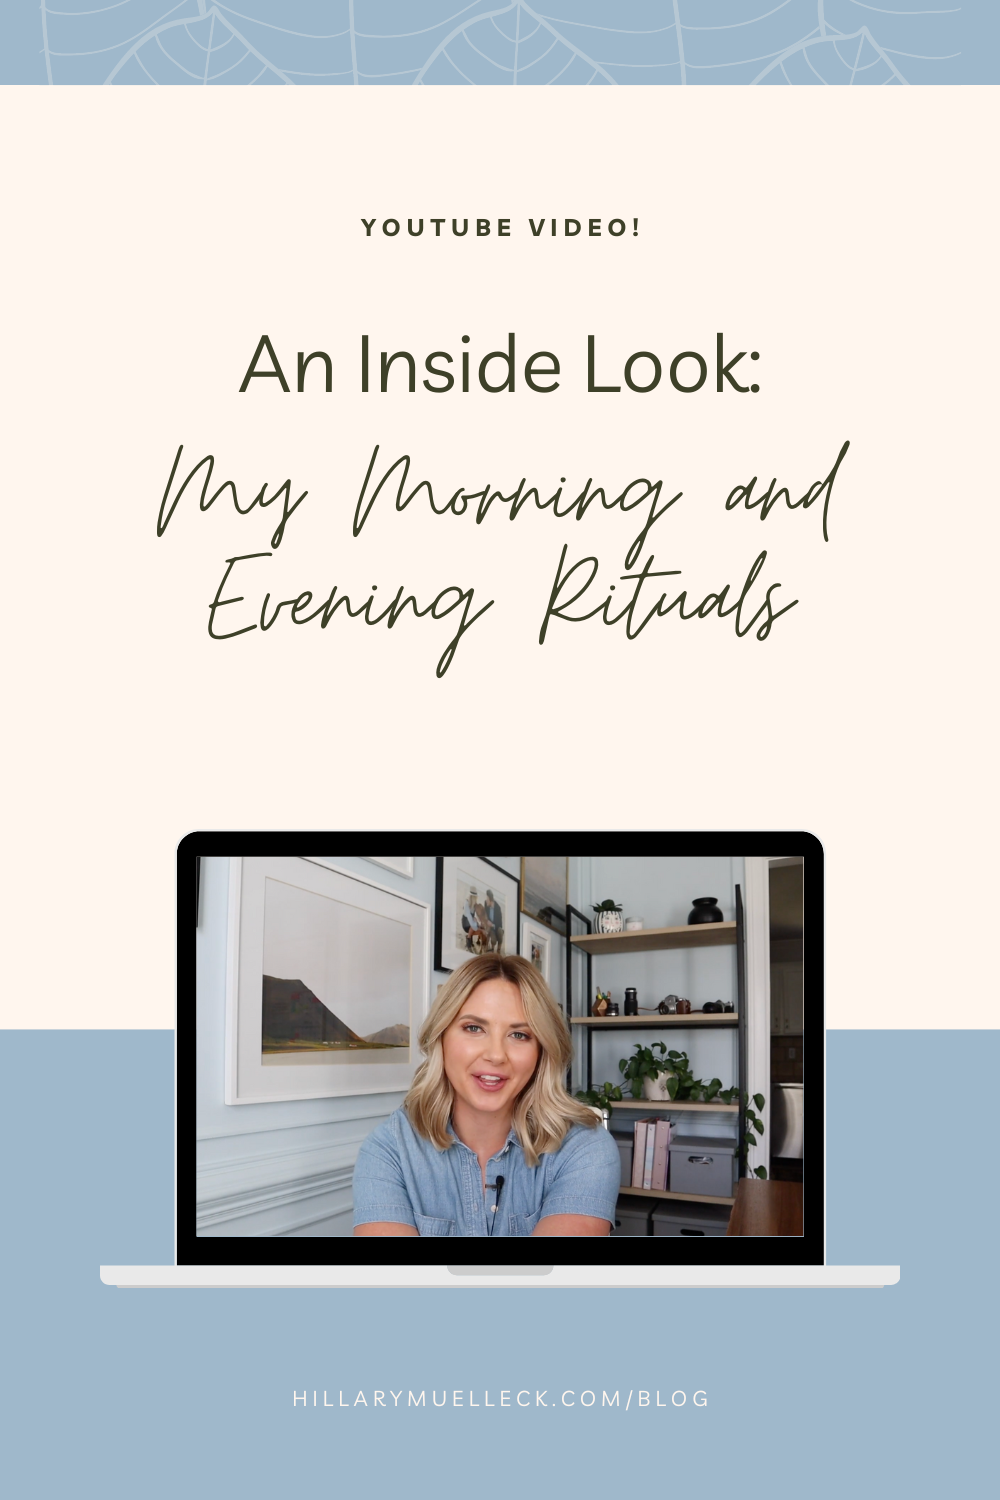 Hillary Muelleck shares her morning and evening rituals for a more balanced life